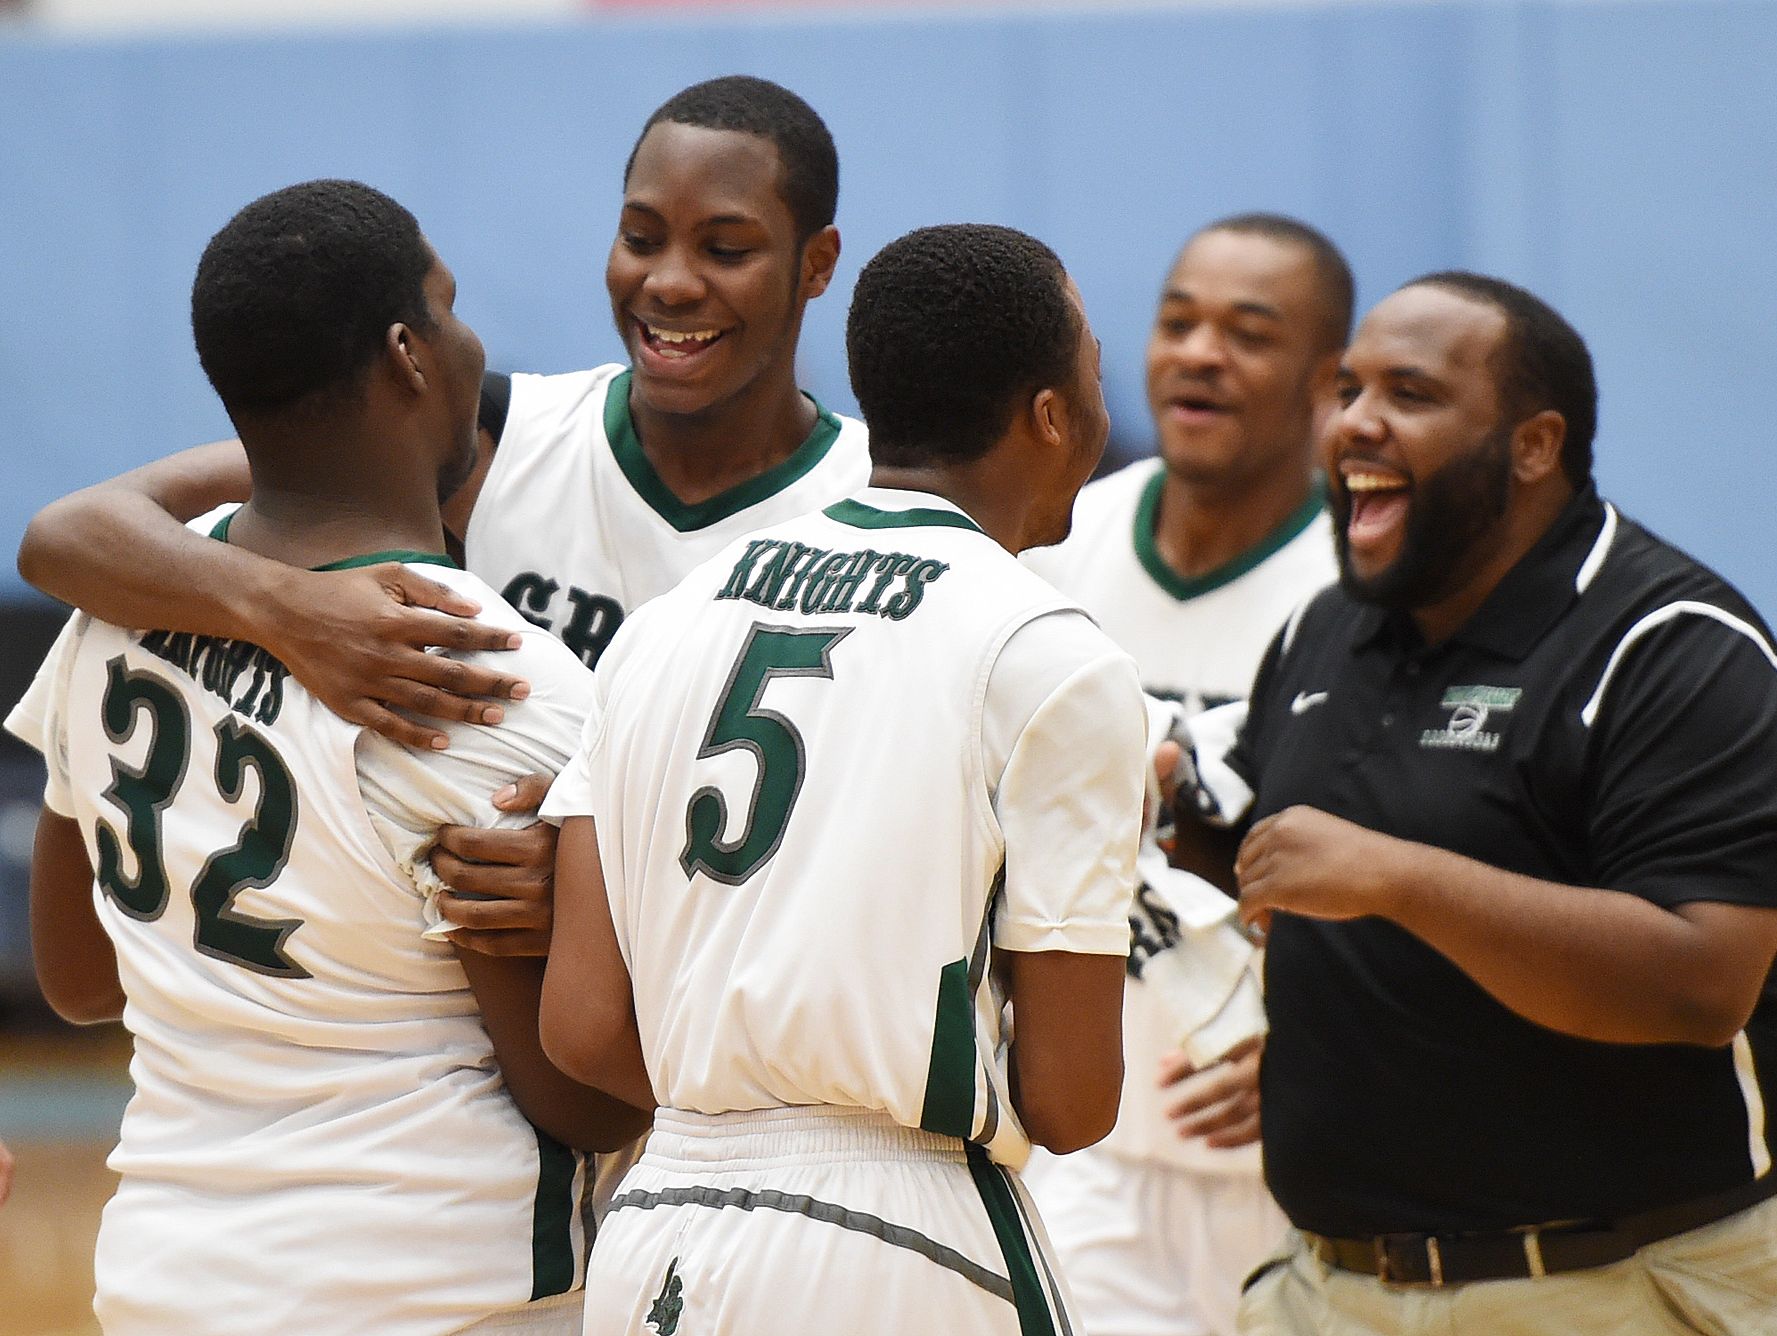 Mount Pleasant's Isaiah McCready (32) is congratulated after scoring the final basket in the Green Knights' 69-43 win over St. Michael's of Toronto at Slam Dunk to the Beach on Dec. 29